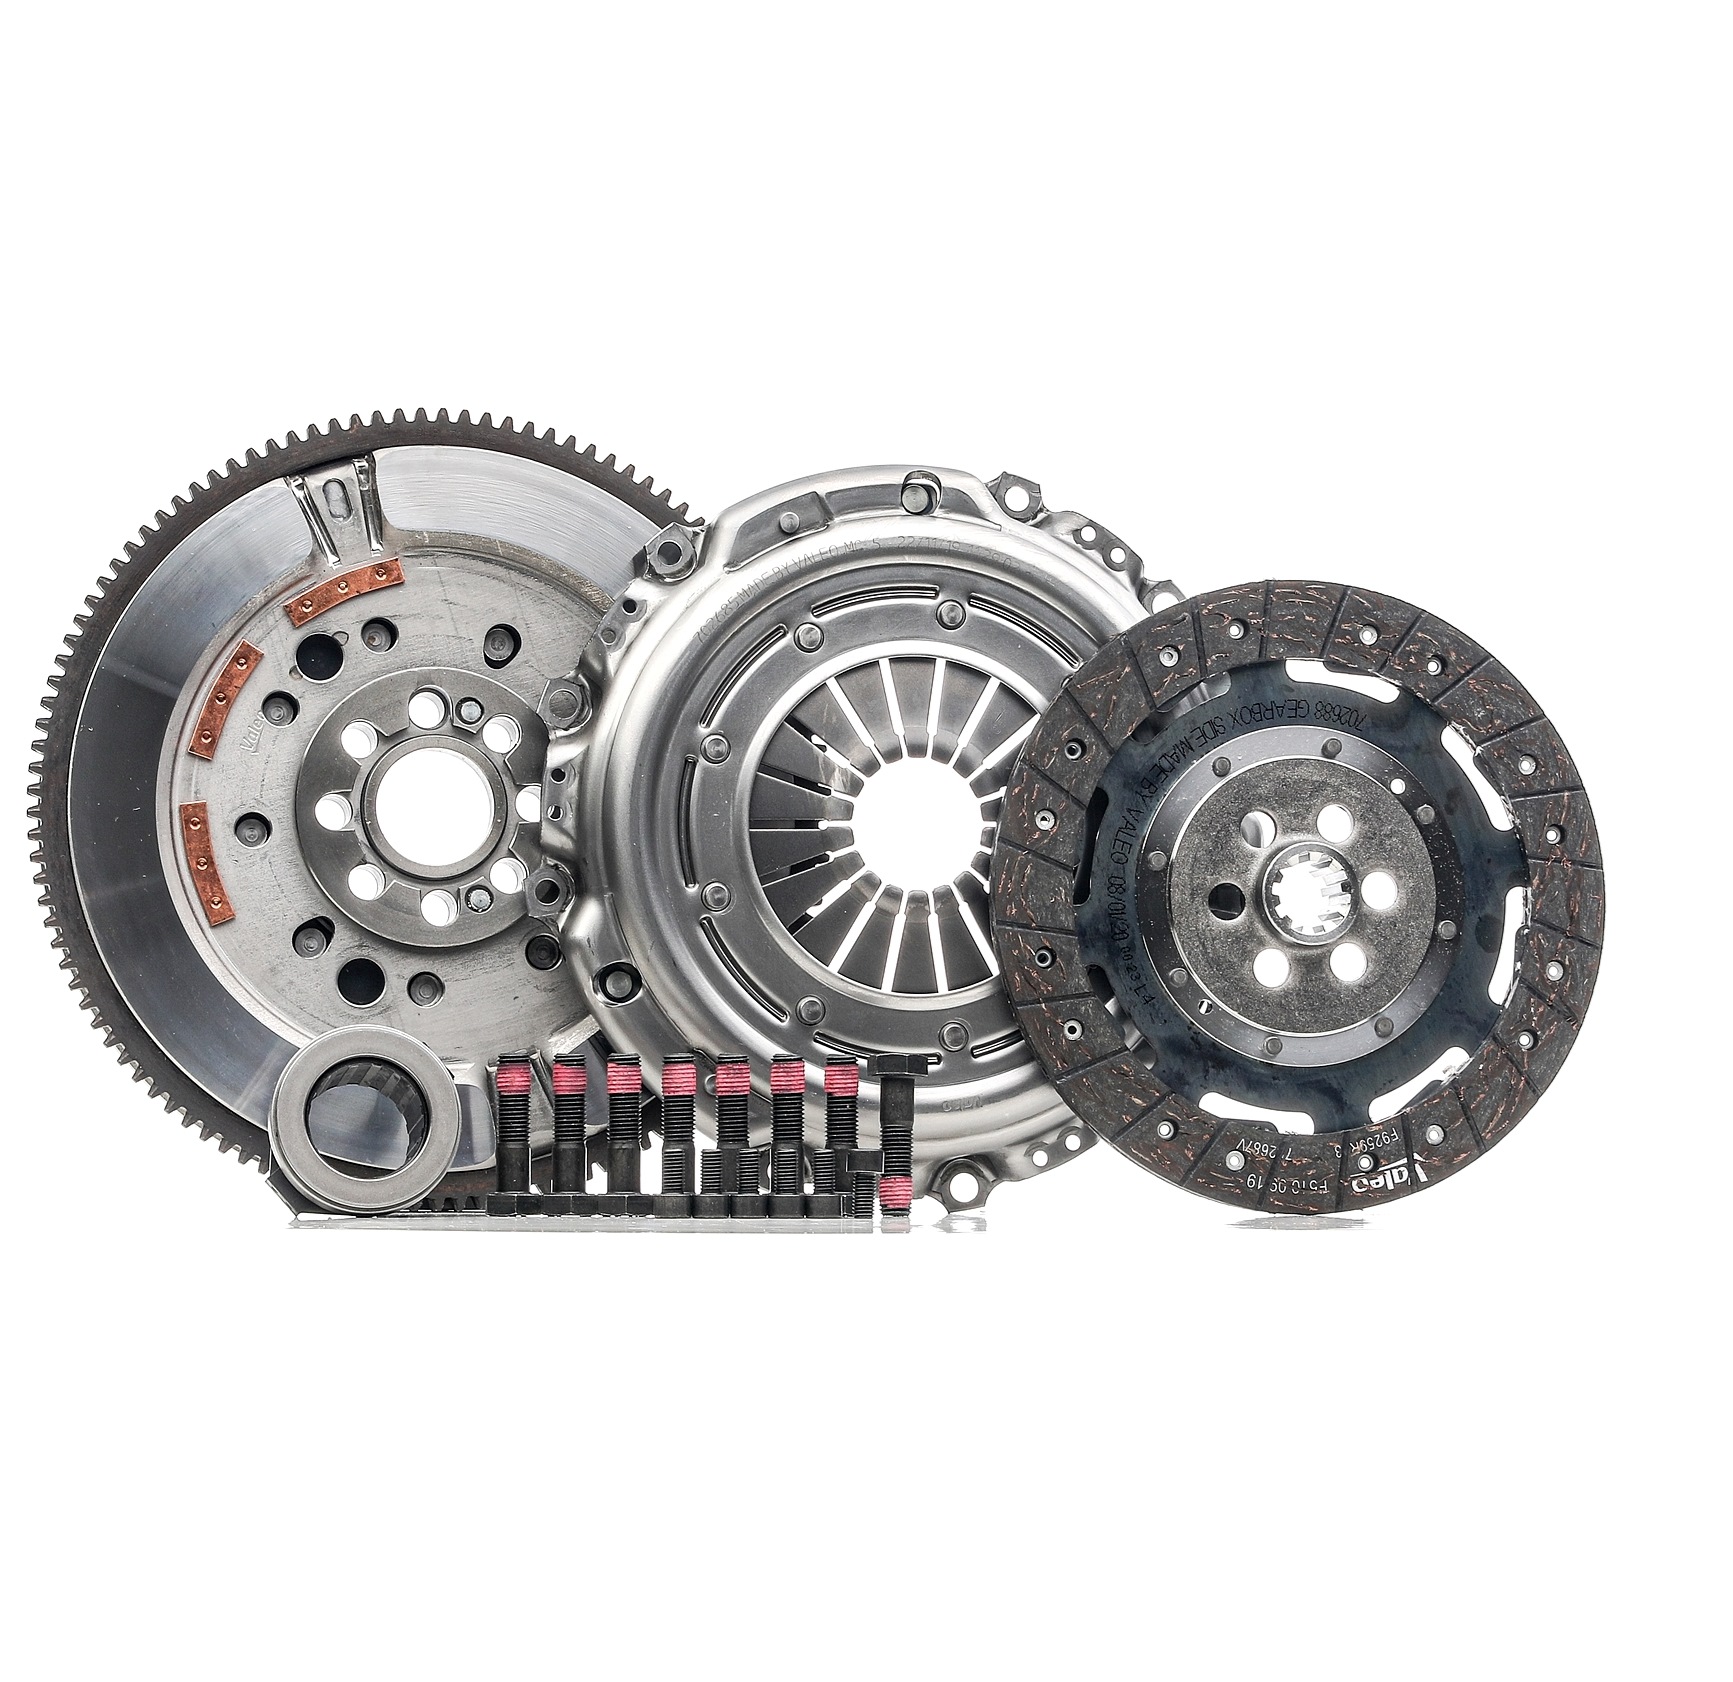 VALEO Clutch and flywheel kit 3 Compact (E46) new 837049